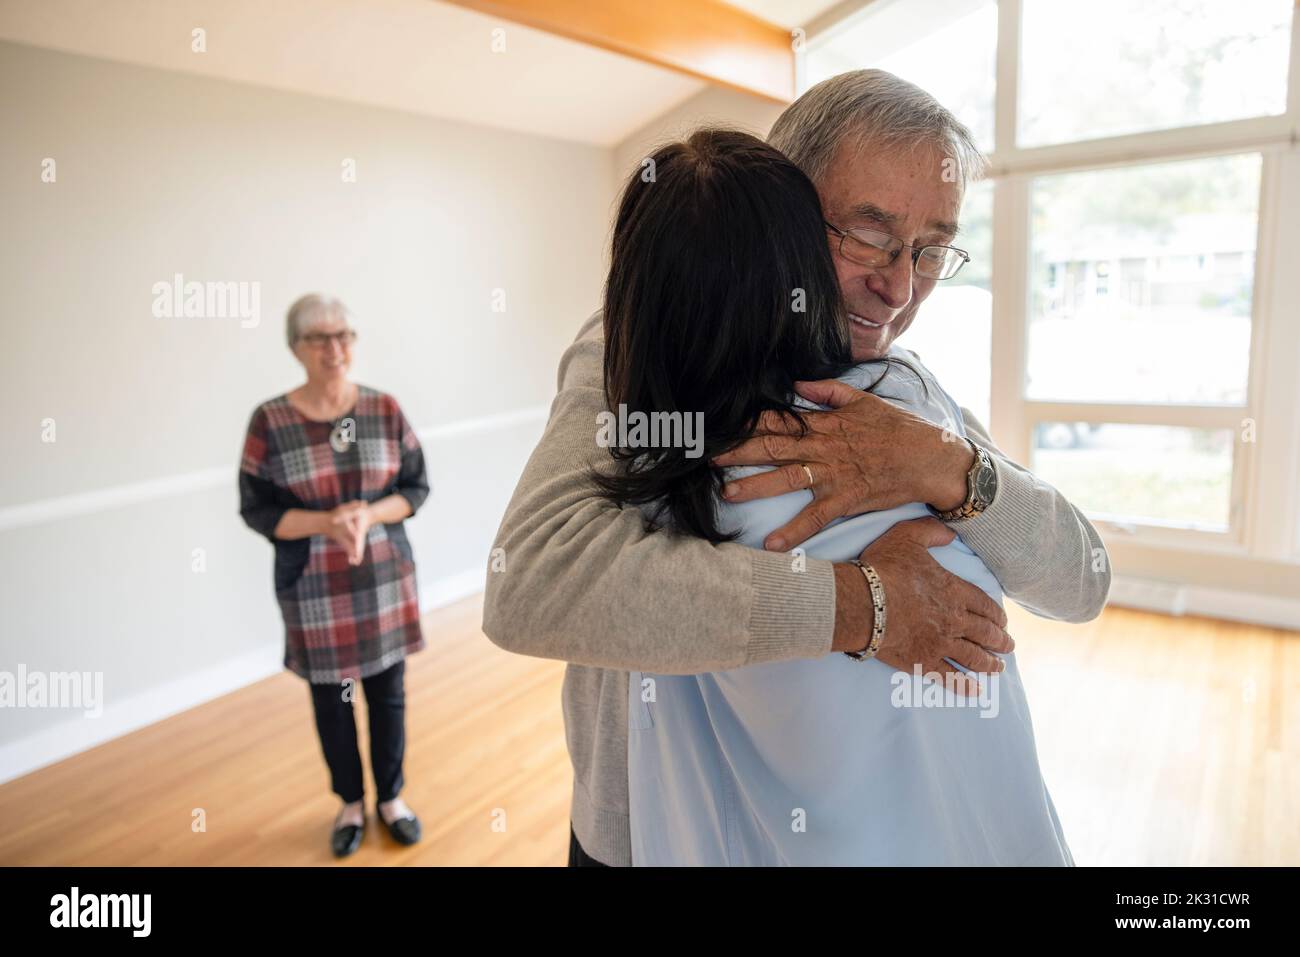 Daughter hugging senior father in new home Stock Photo